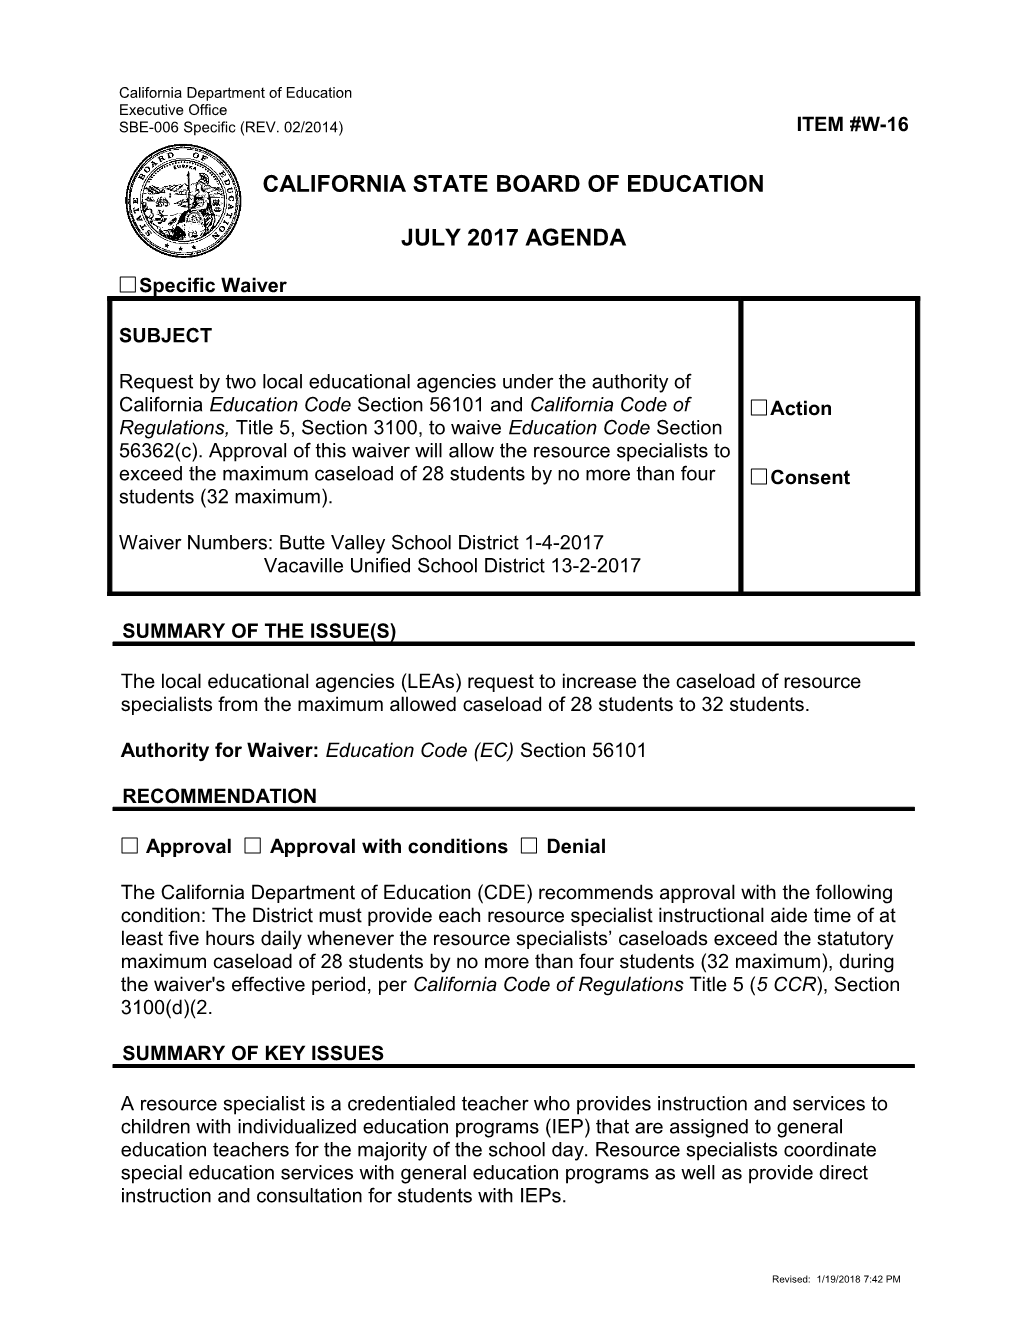 July 2017 Waiver Item W-16 - Meeting Agendas (CA State Board of Education)